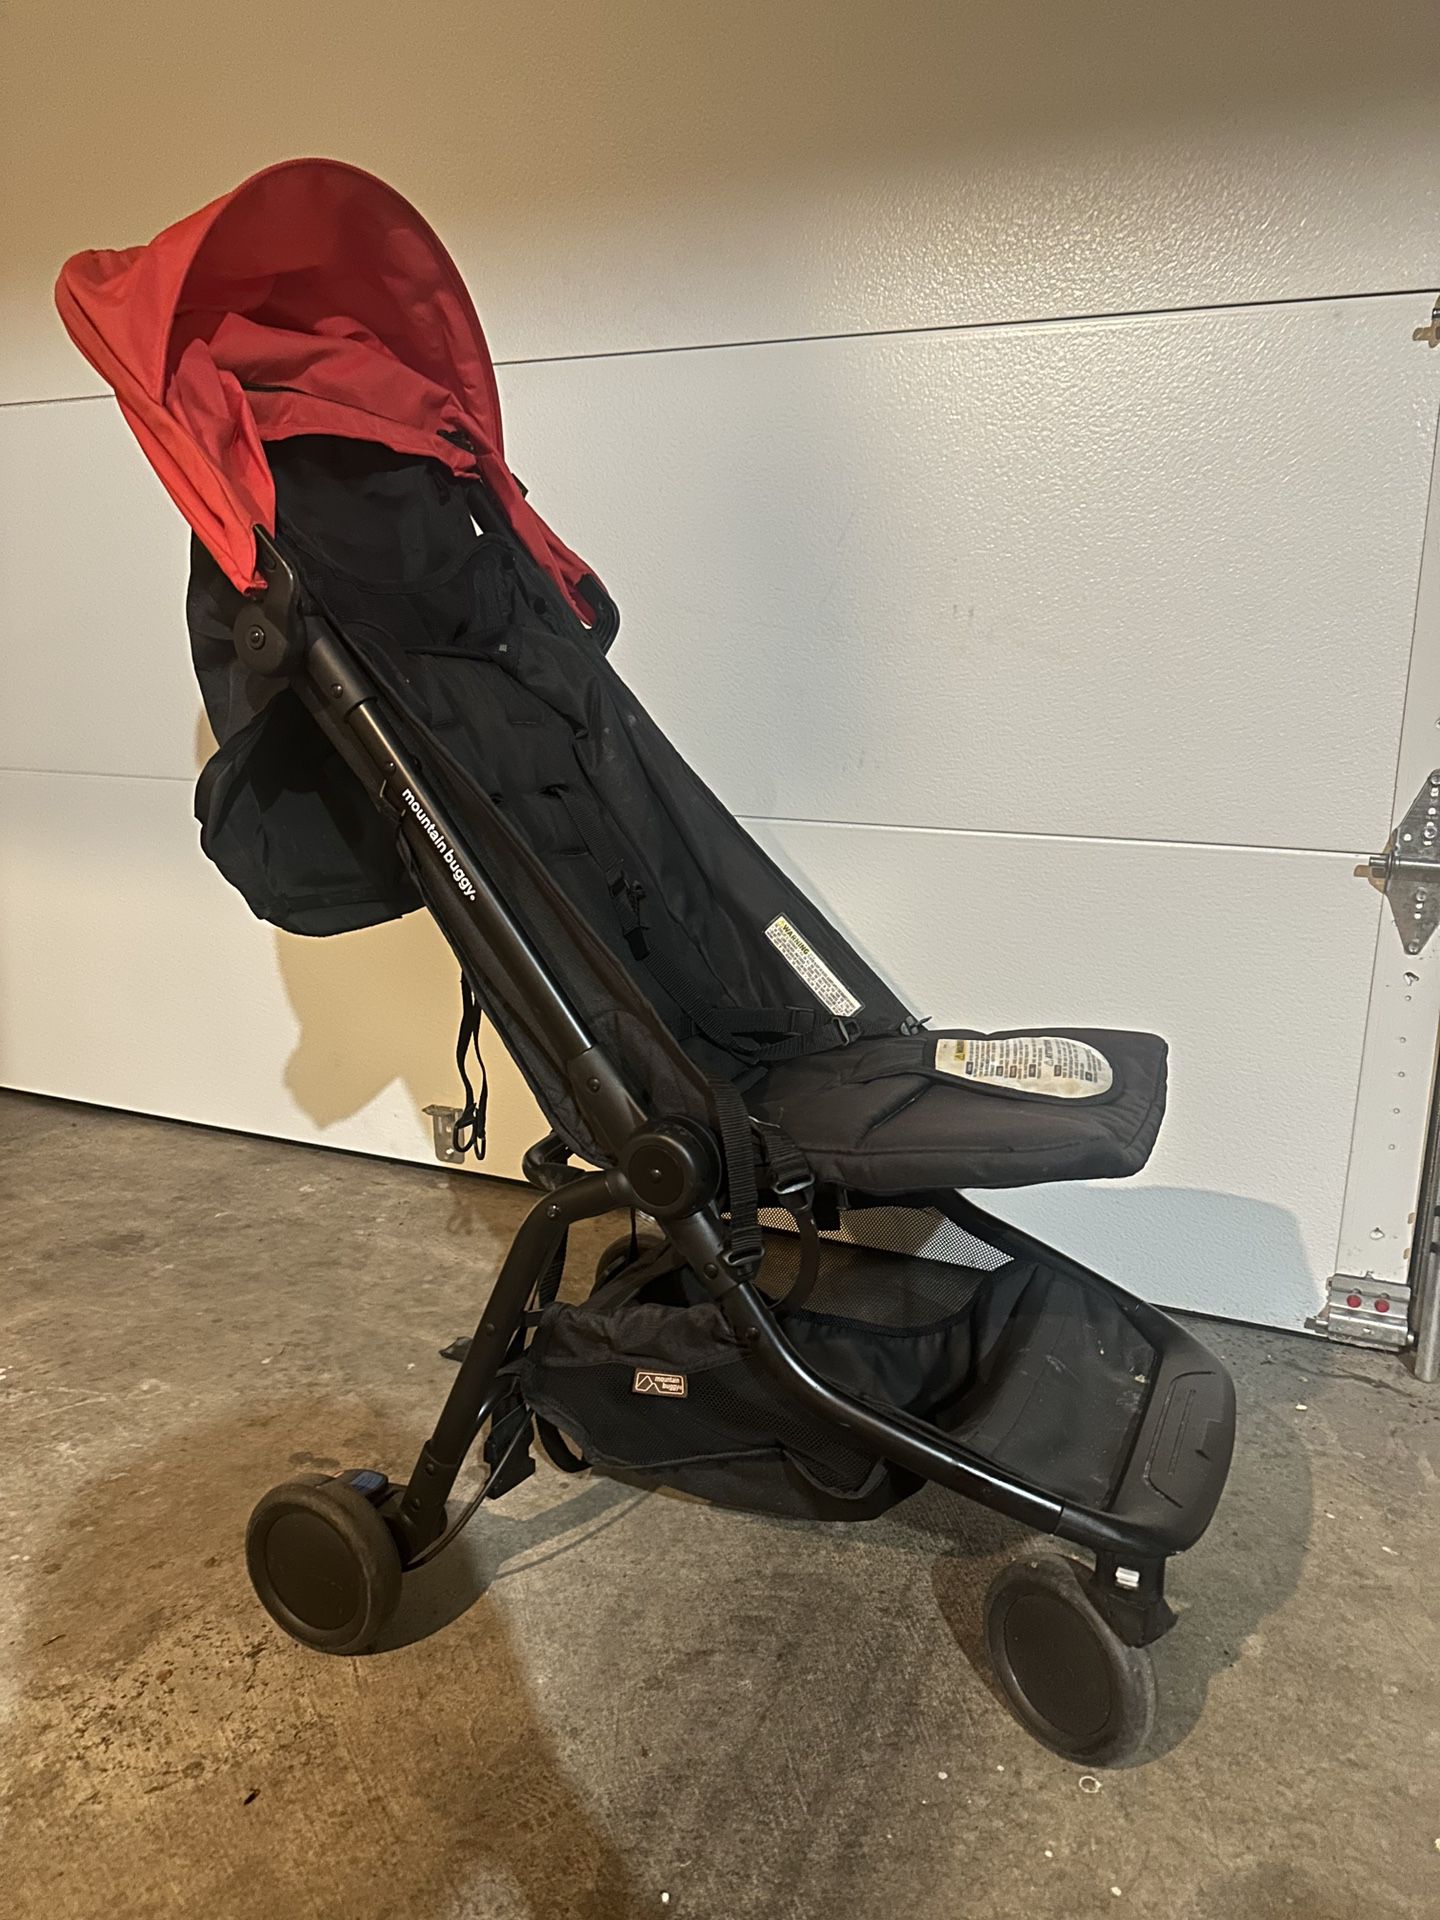 Mountain Buggy Collapsible Stroller